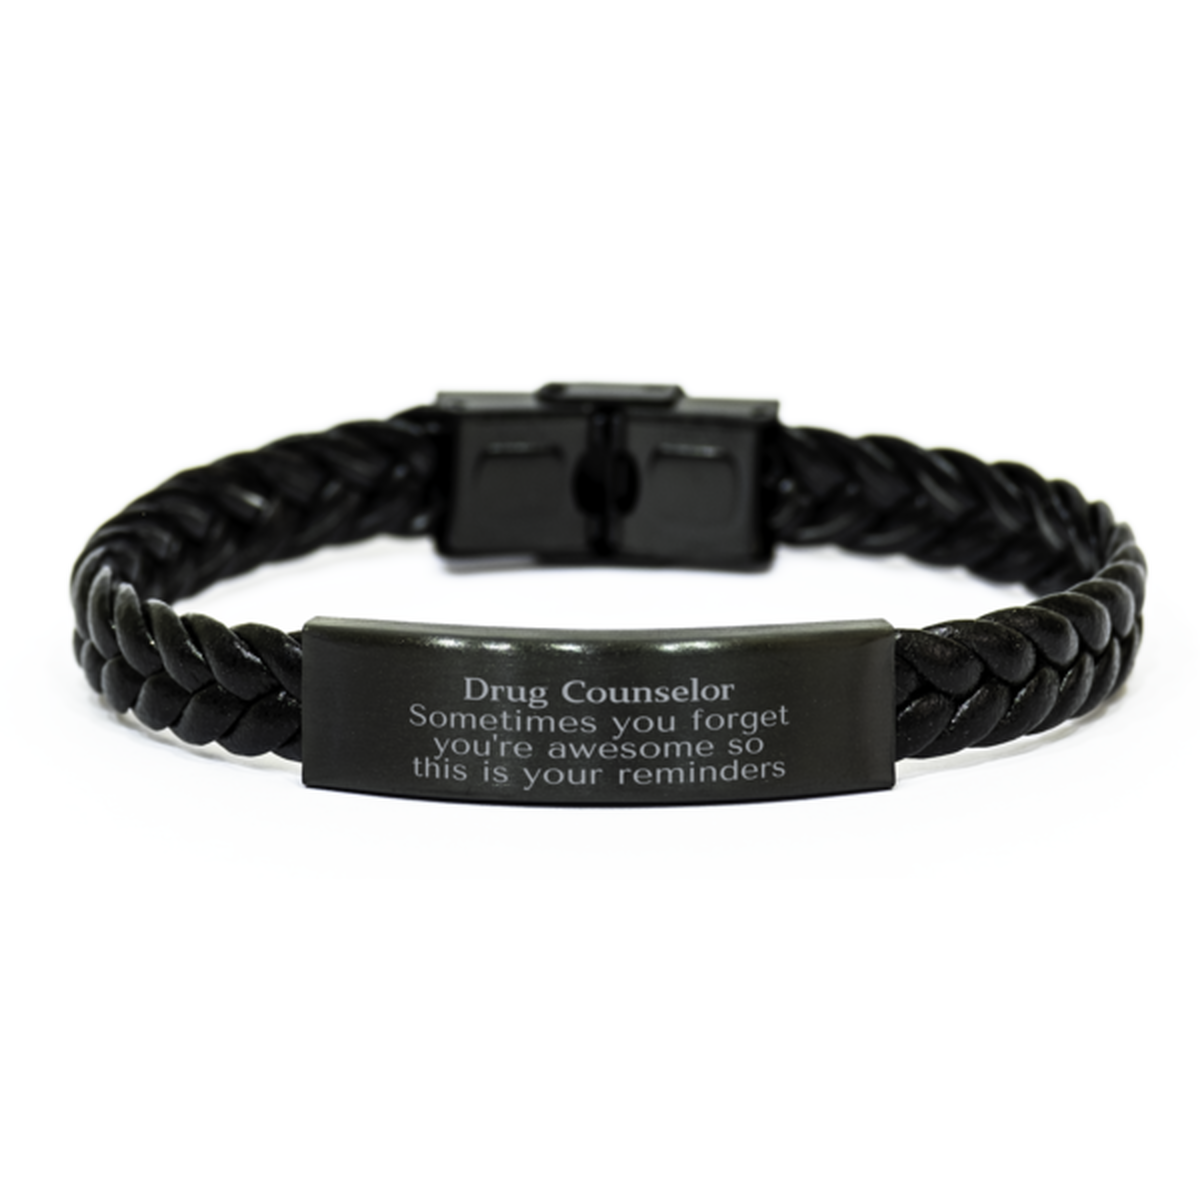 Sentimental Drug Counselor Braided Leather Bracelet, Drug Counselor Sometimes you forget you're awesome so this is your reminders, Graduation Christmas Birthday Gifts for Drug Counselor, Men, Women, Coworkers